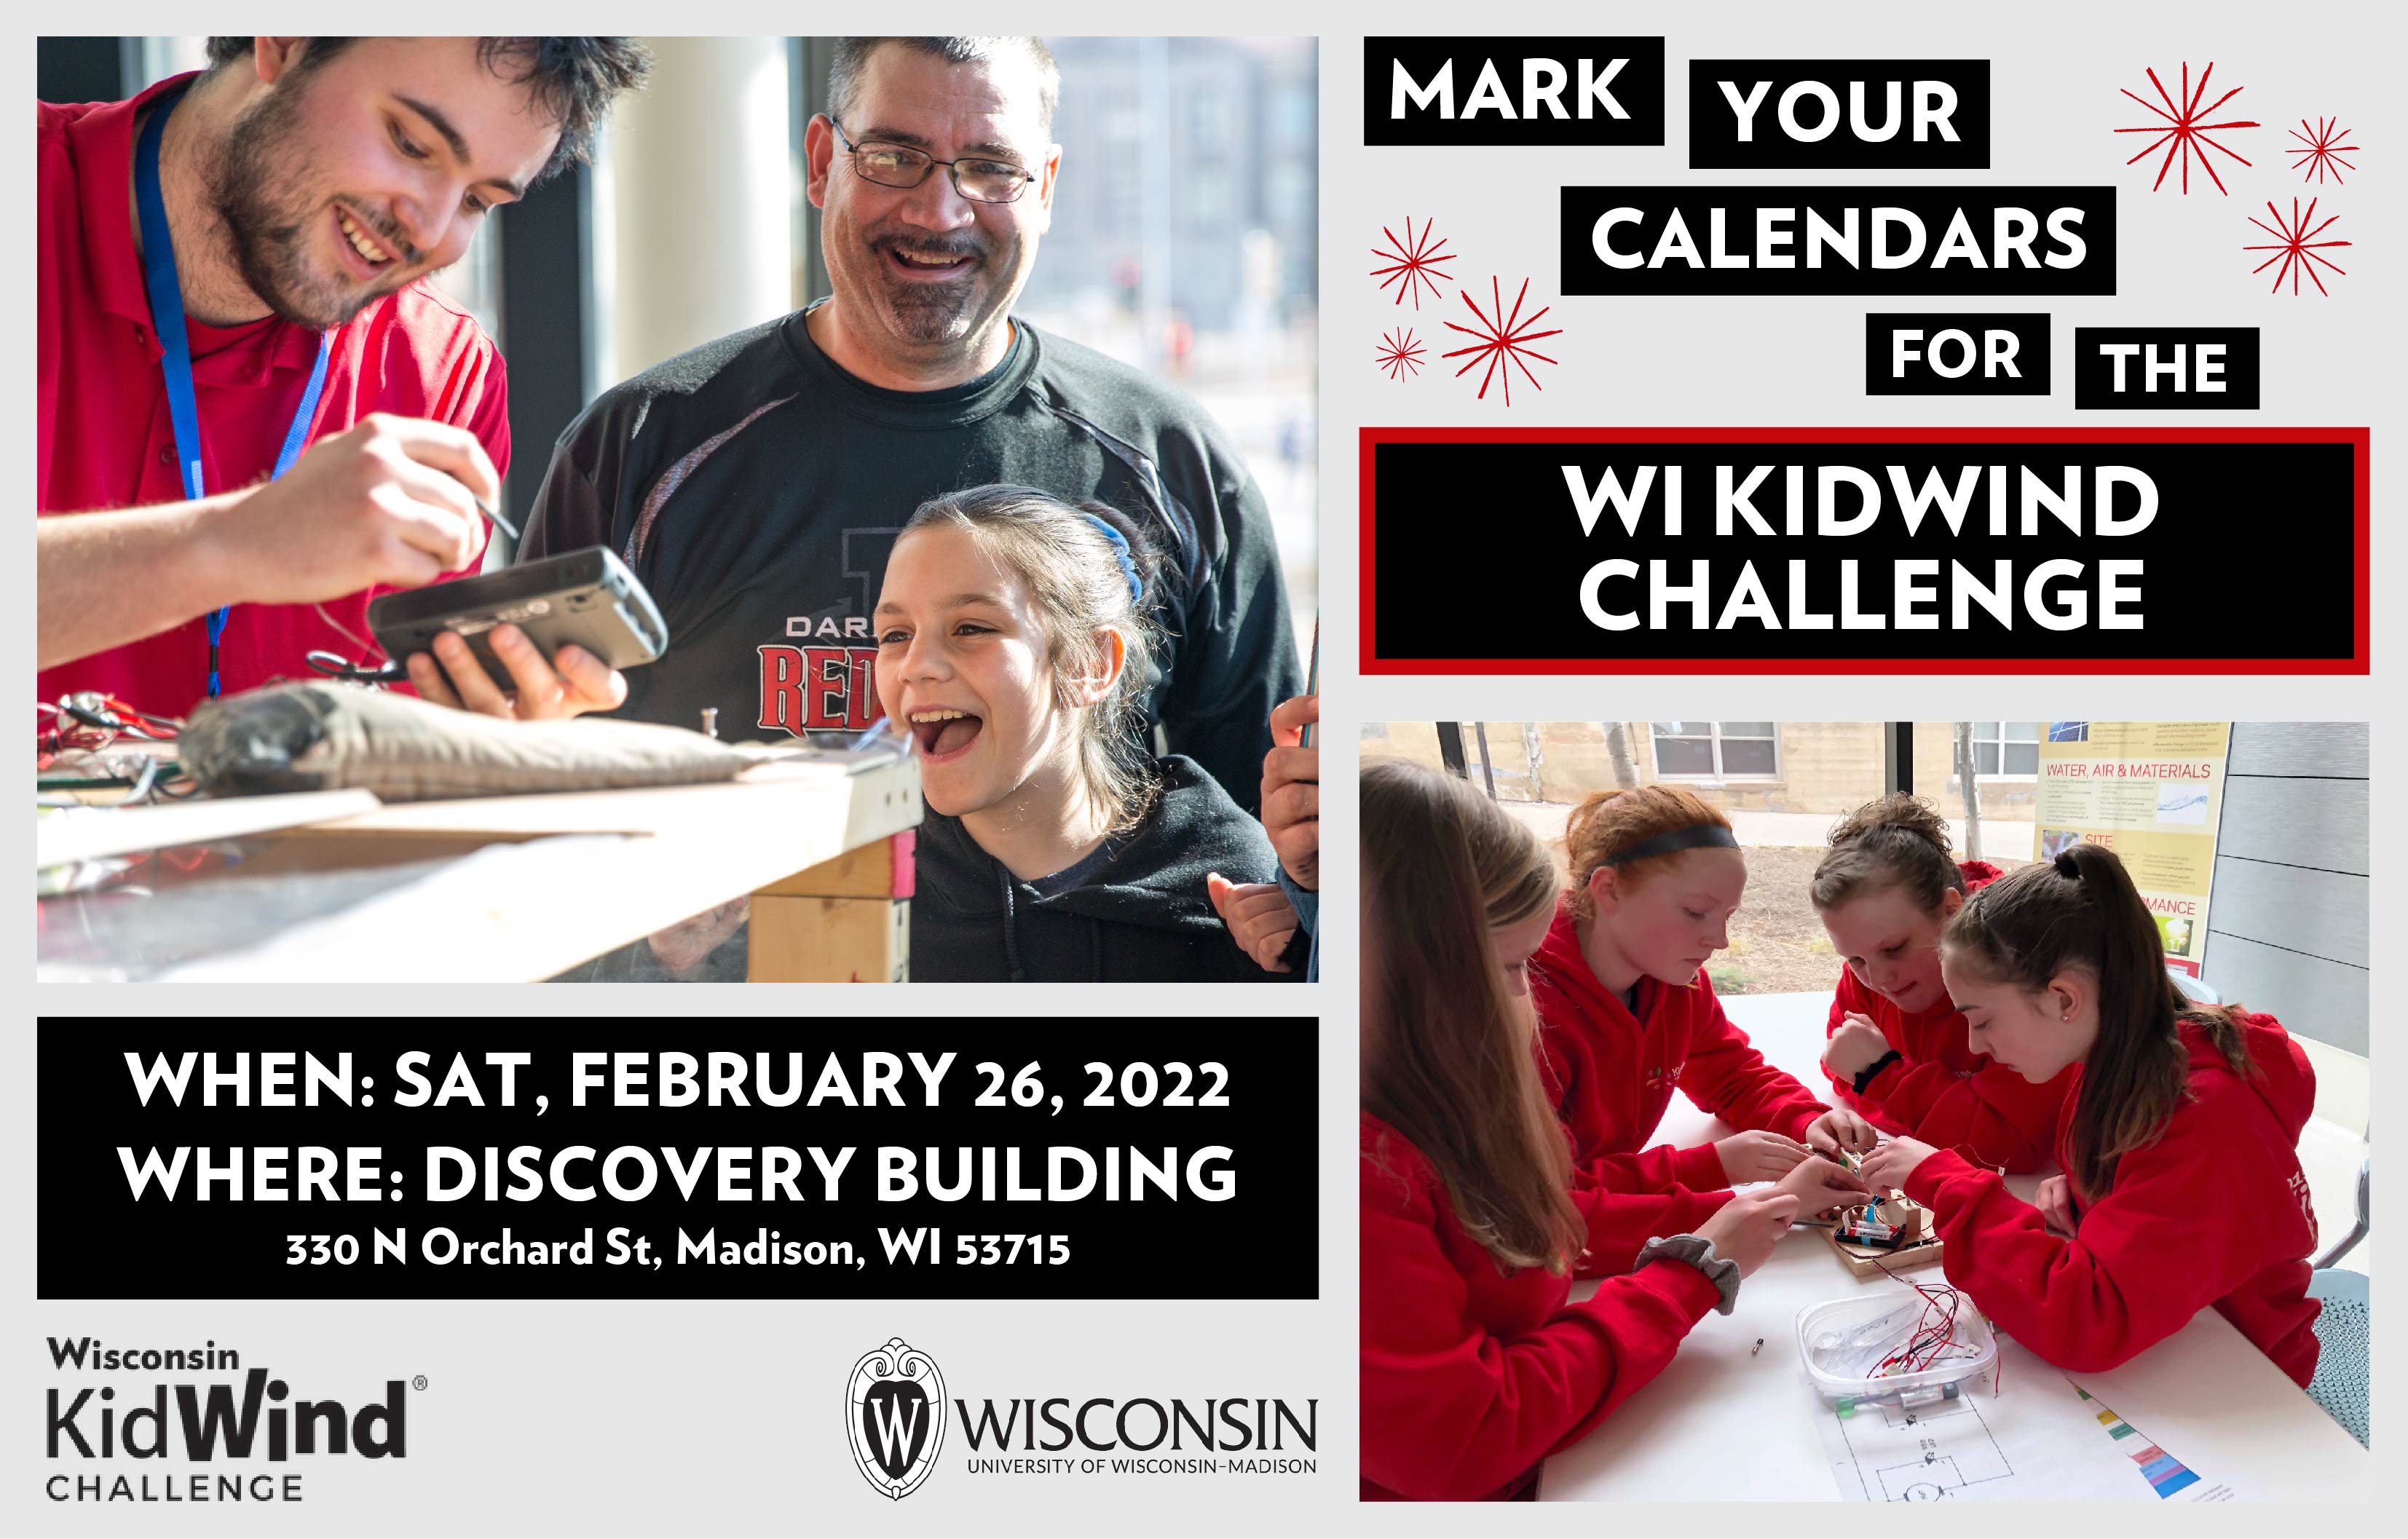 Image shows laughing students and KidWind Challenge volunteers and reads "Mark your Calendars for the WI KidWind Challenge." When: Saturday, Feb 26th. Where: Discovery Building 330 N Orchard St. Madison, WI 53715. 